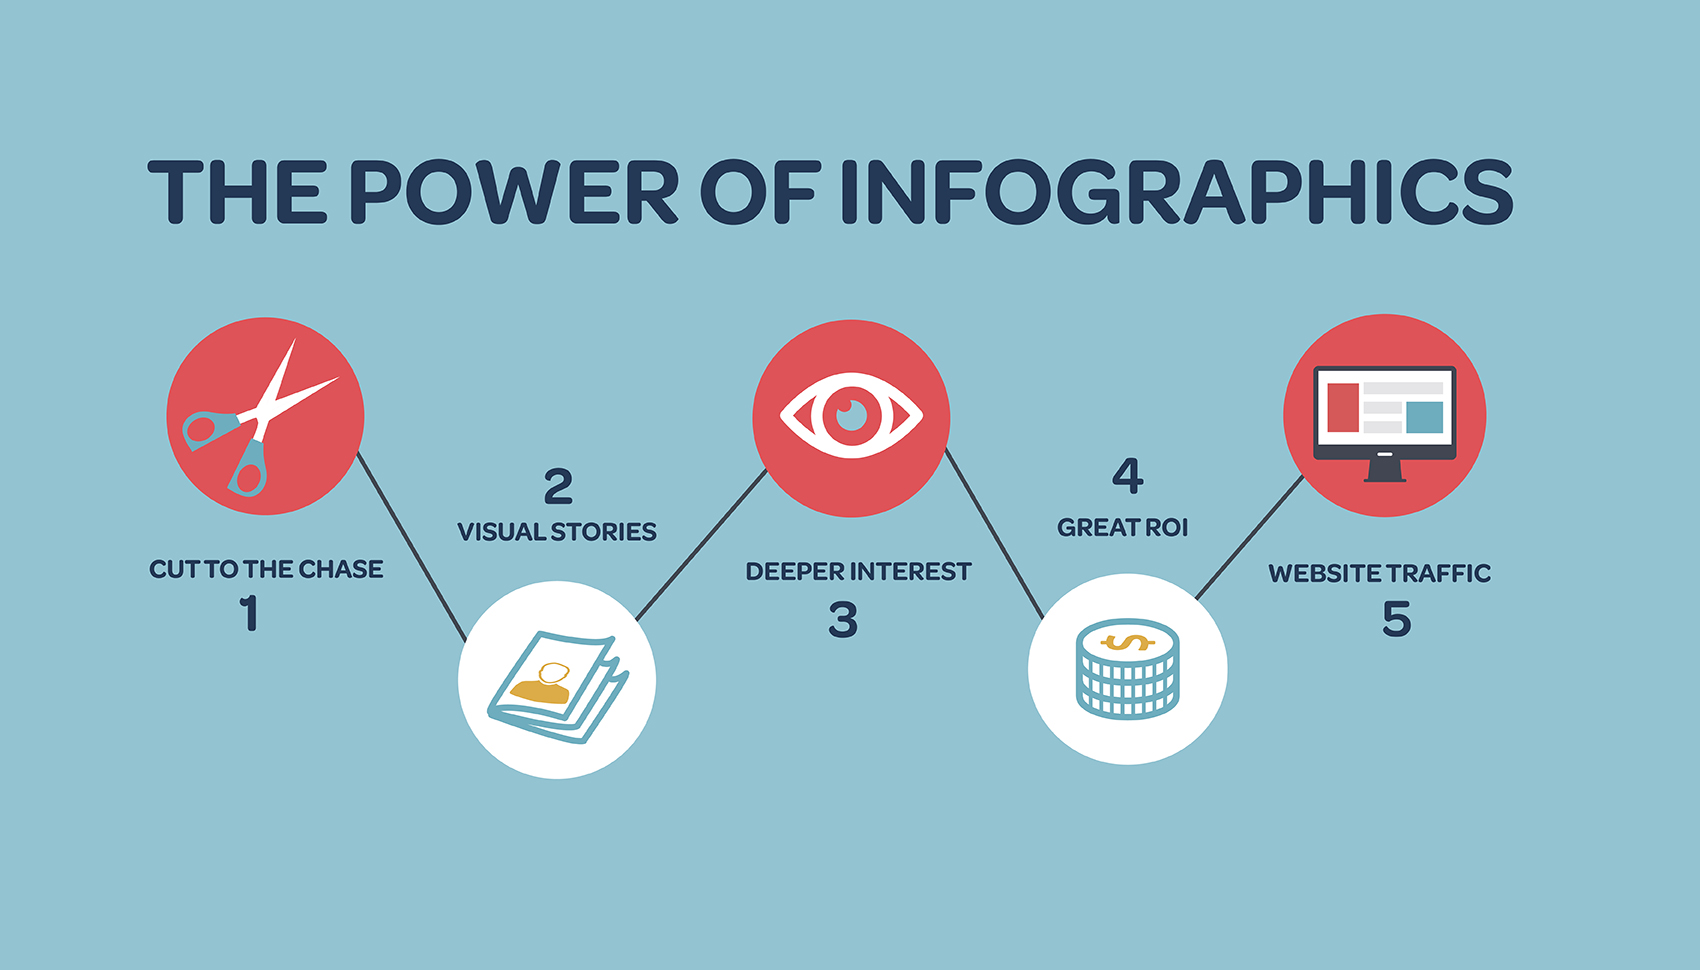 A picture is really worth a 1000 words (the power of infographics)